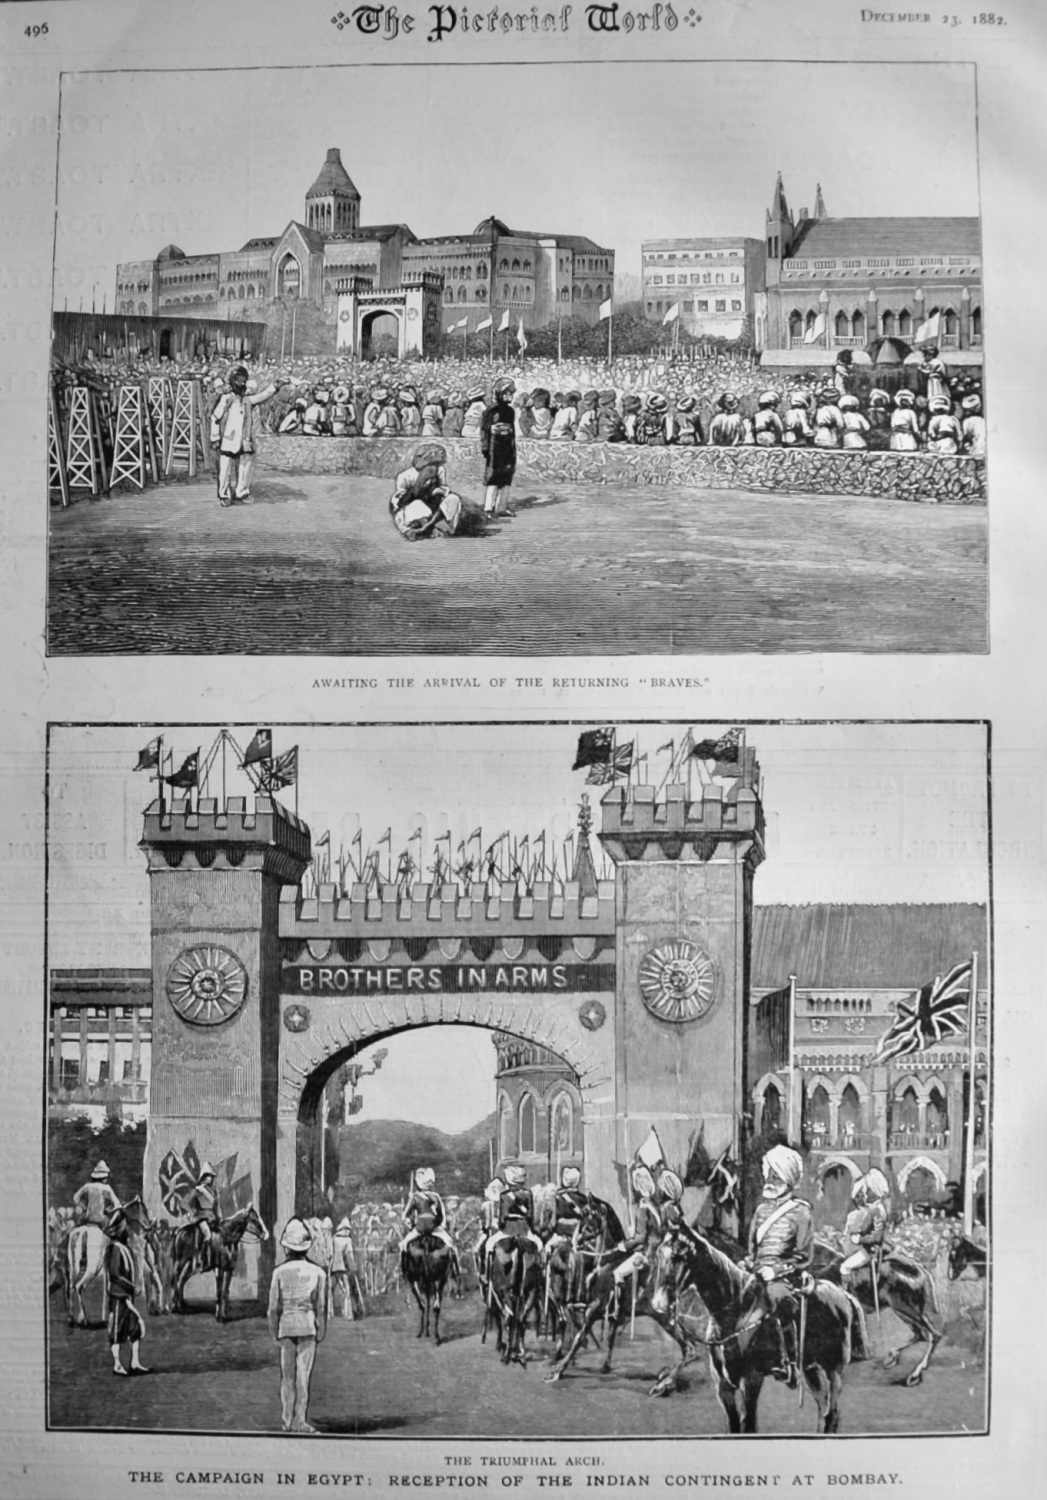 The Campaign in Egypt :  Reception of the Indian Contingent at Bombay.  188